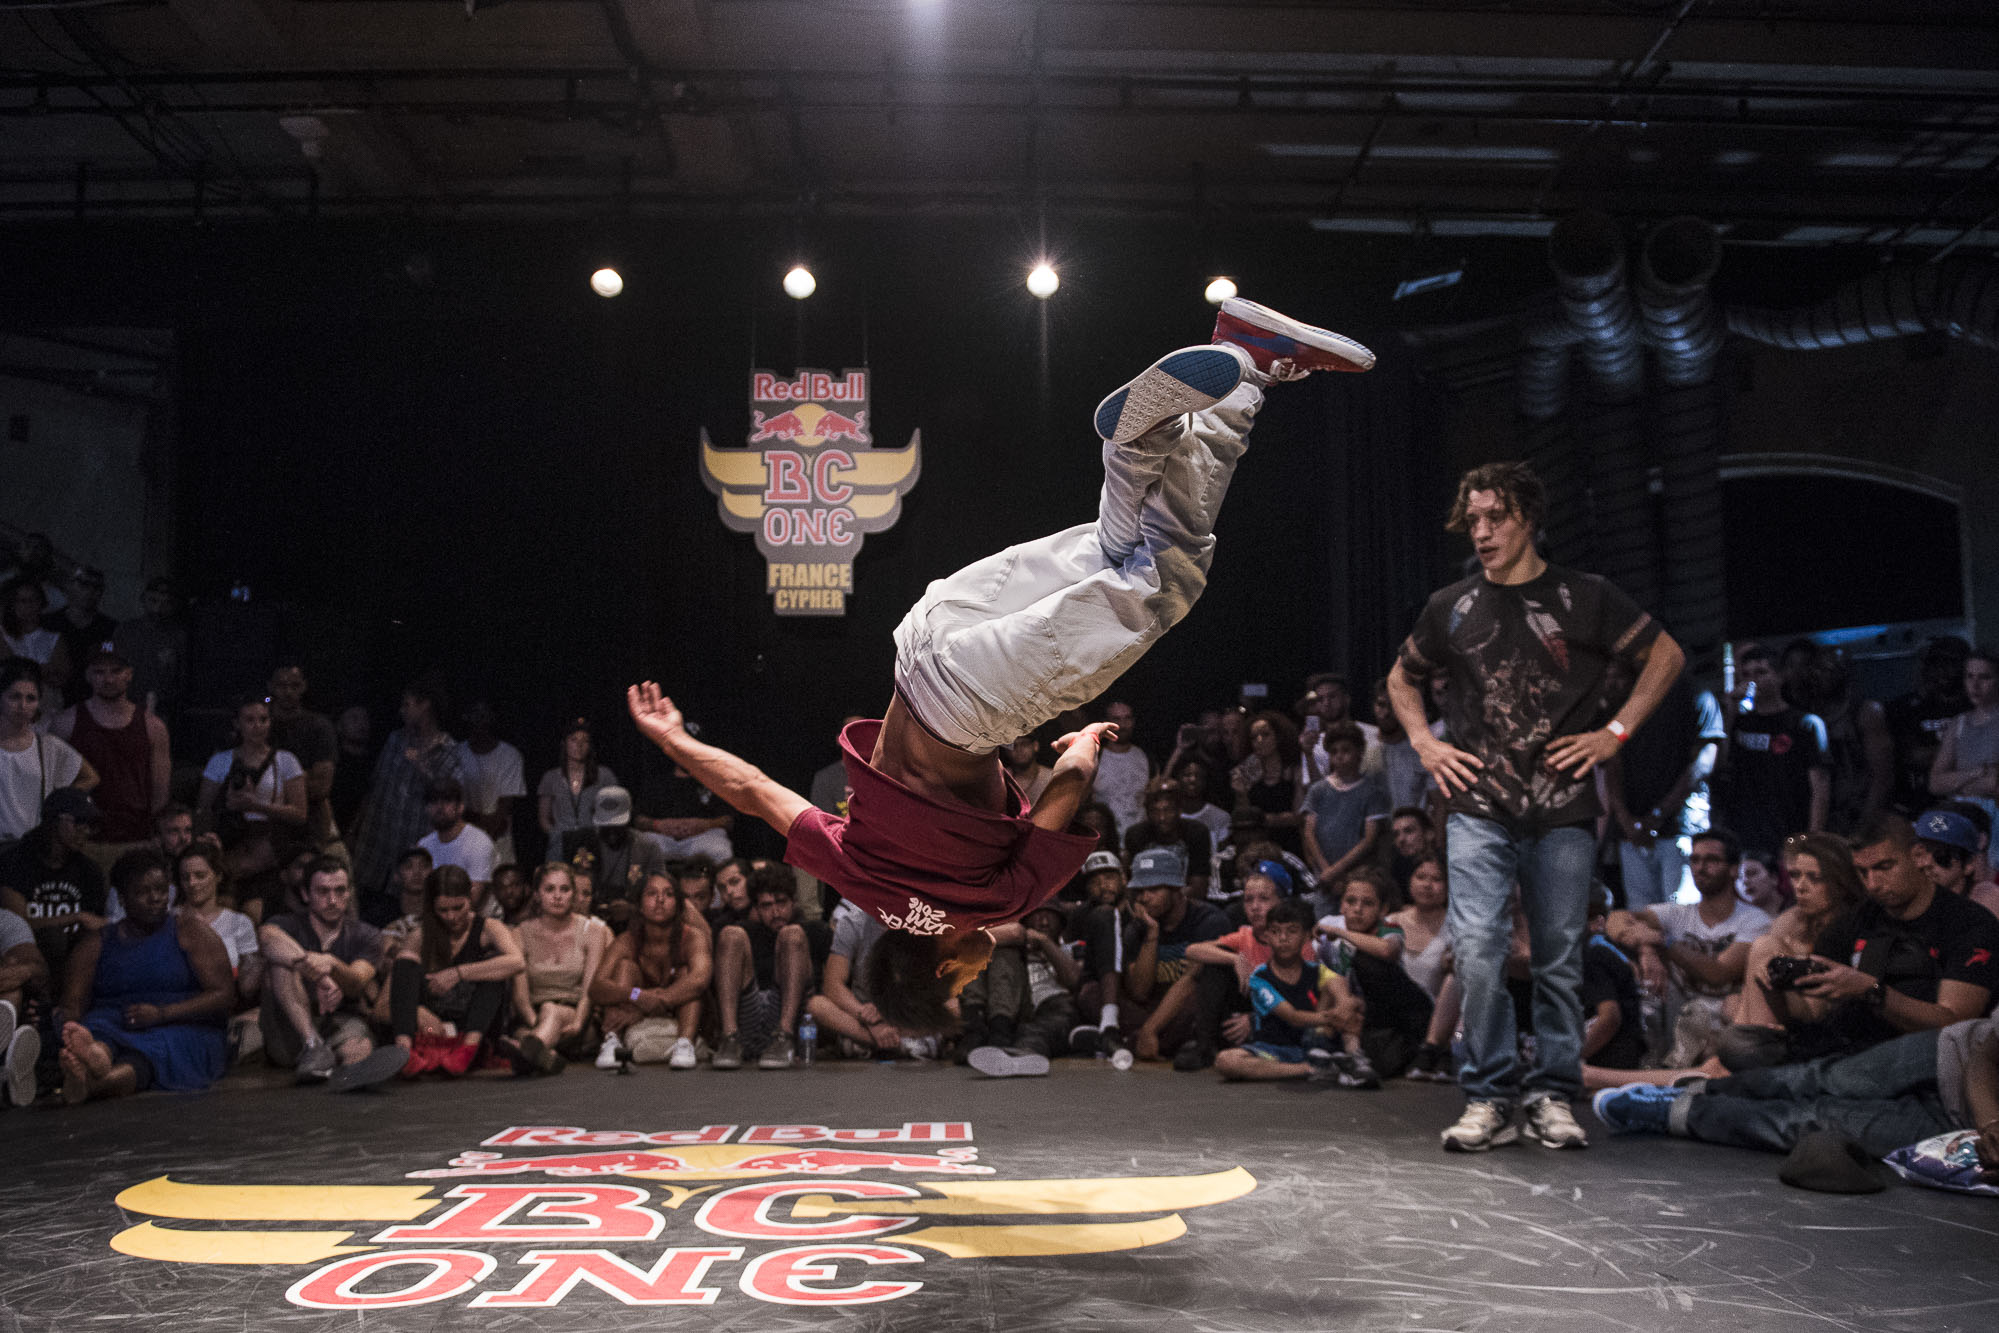 Will (winner) competes at the WIP Villette during the Red Bull BC One France Cypher Final in Paris, France on July 10th 2016.